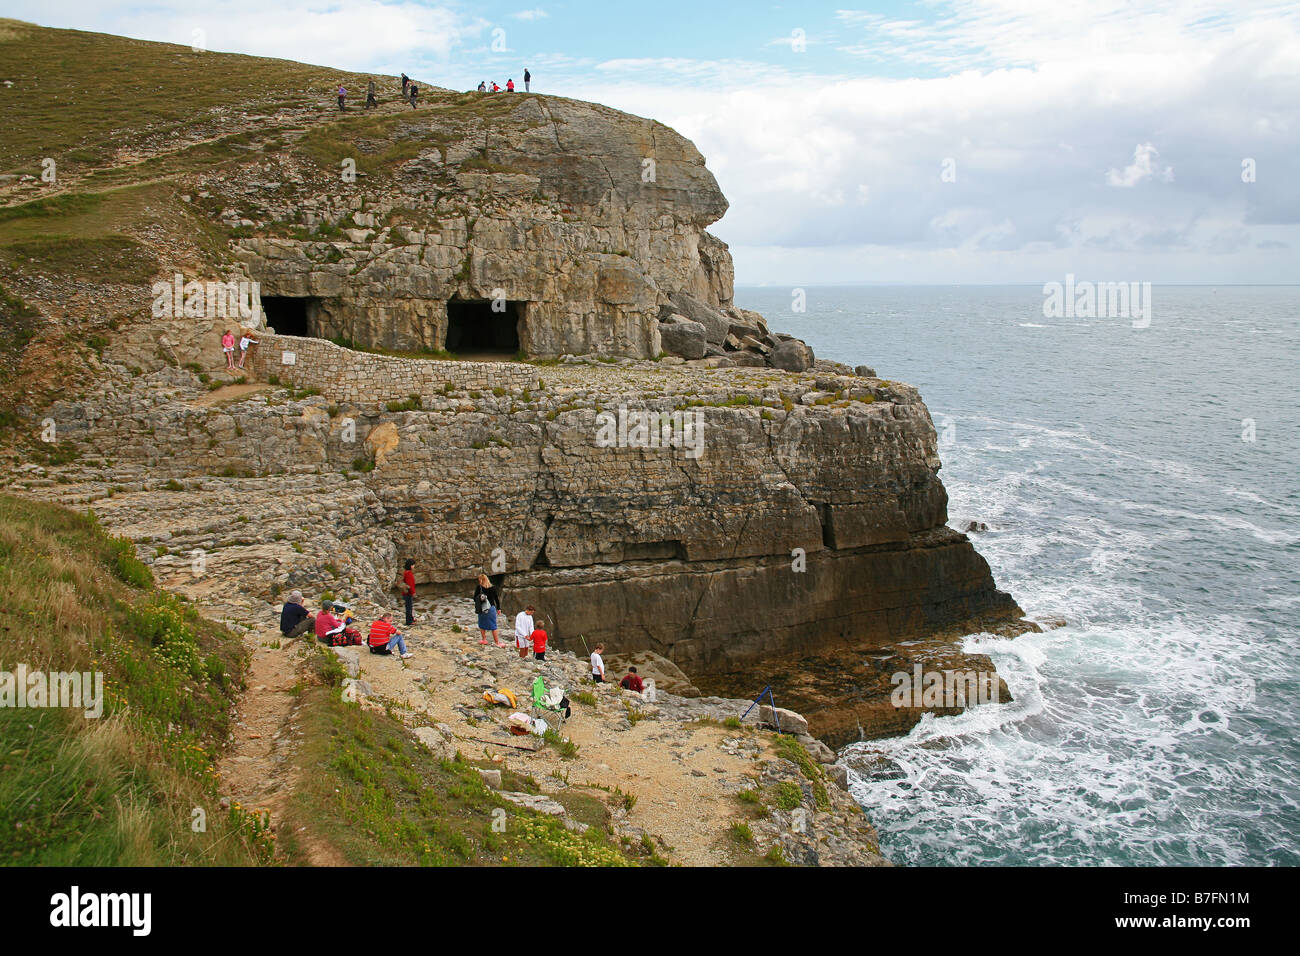 Tilly Whim Caves - a former portland stone quarry - at Anvil Point near Swanage Dorset Stock Photo